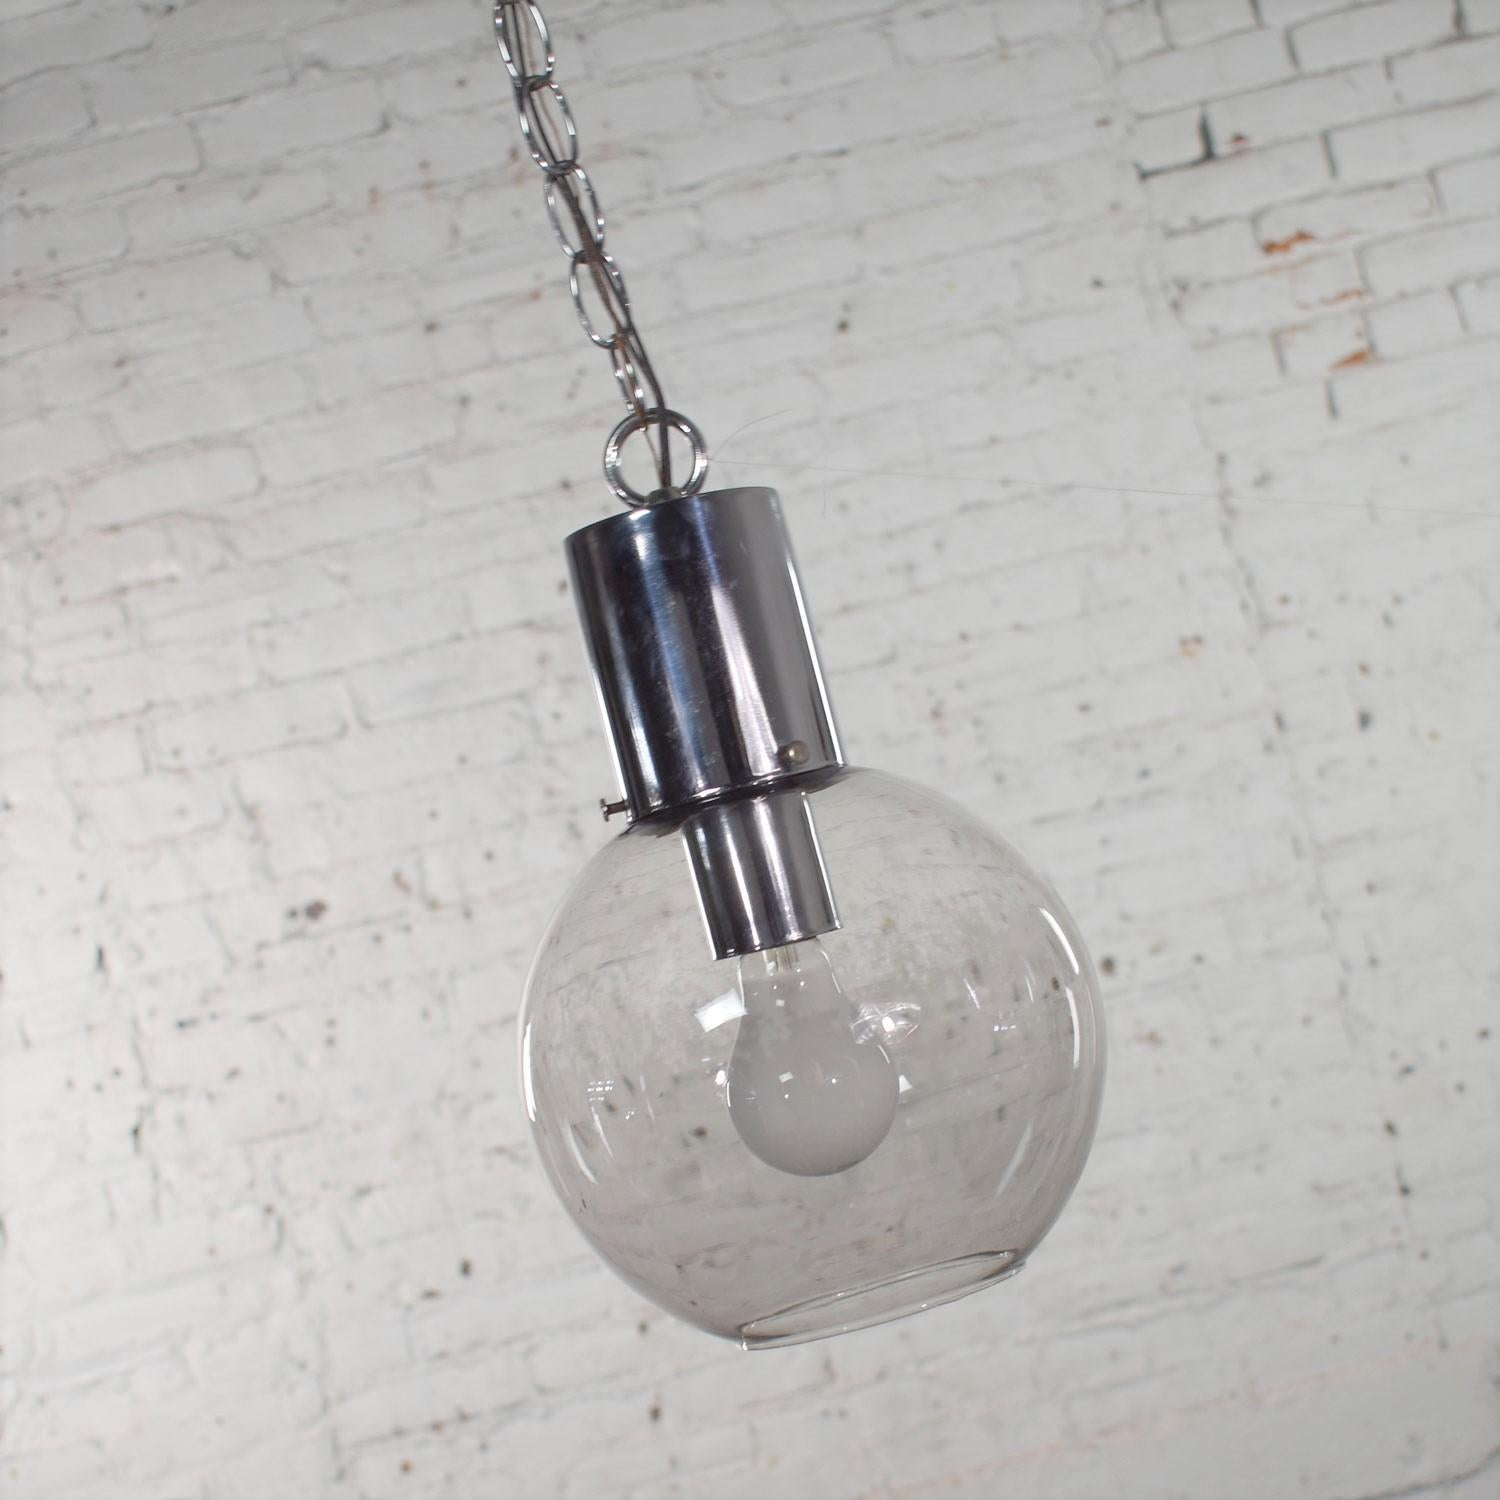 Handsome Mid-Century Modern chrome and lightly smoked glass open globe pendant light with chrome chain. It is in wonderful vintage condition with no outstanding flaws we have detected. Wiring has been checked and it is ready to hang. Please see